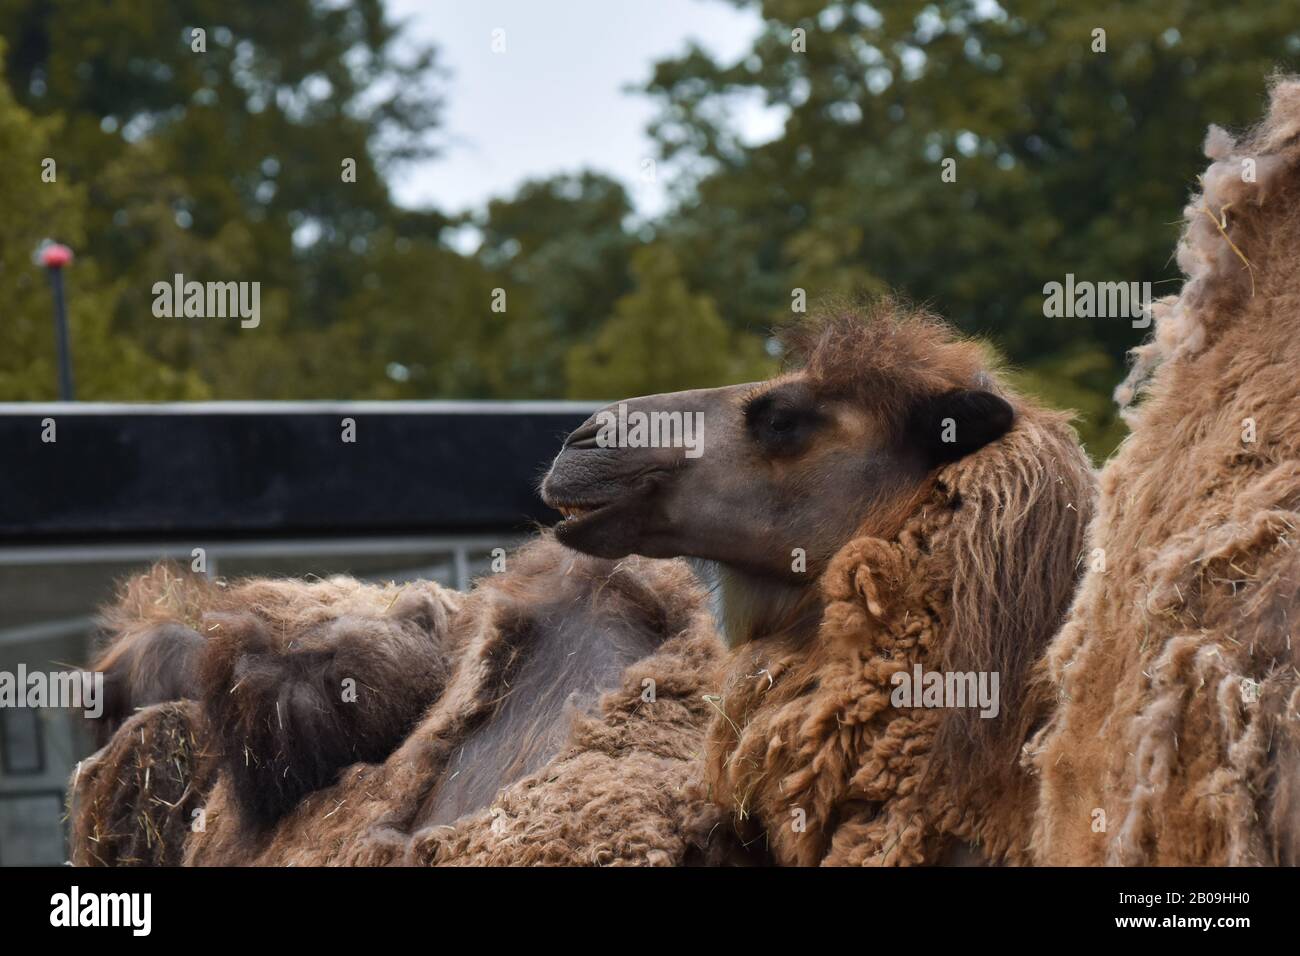 Camel from copenhagen zoo lazily smiling. other camel in the background and trees Stock Photo